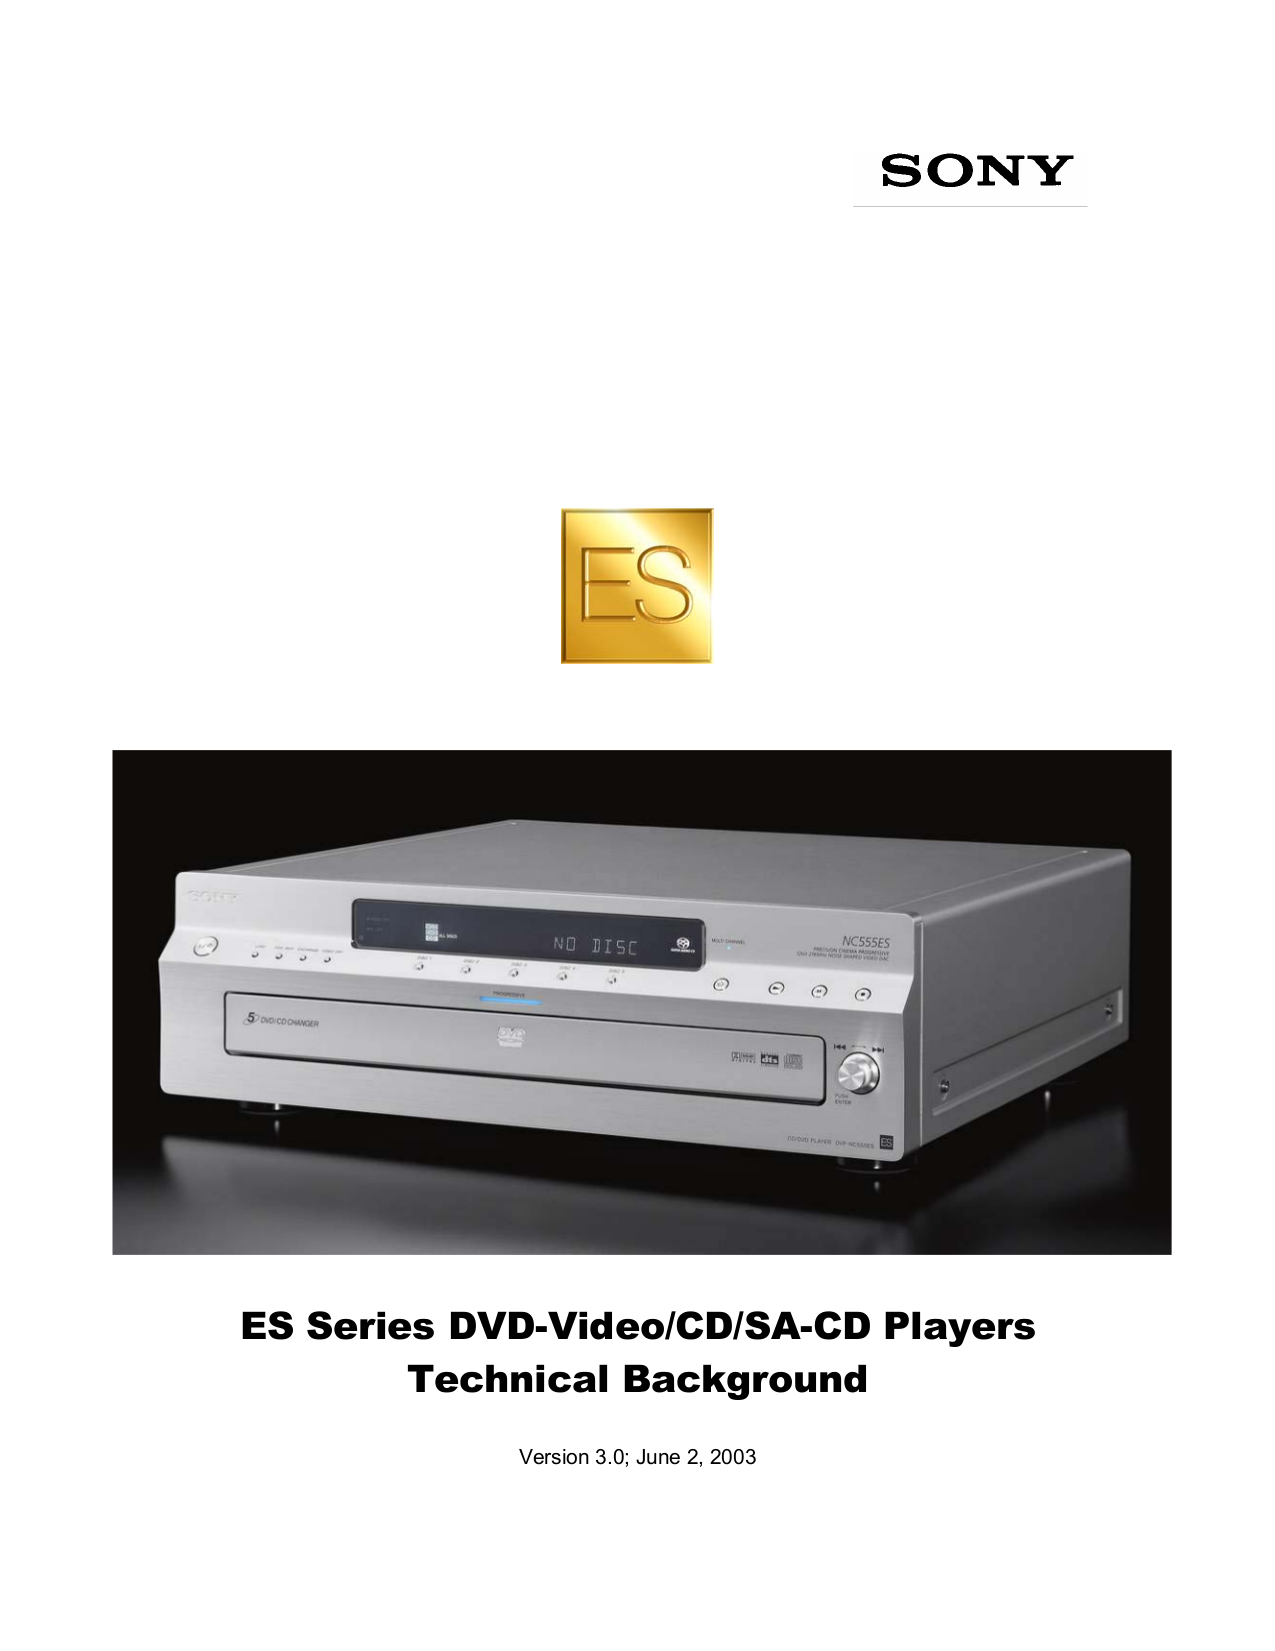 Download free pdf for Sony DVP-S7000 DVD Players manual